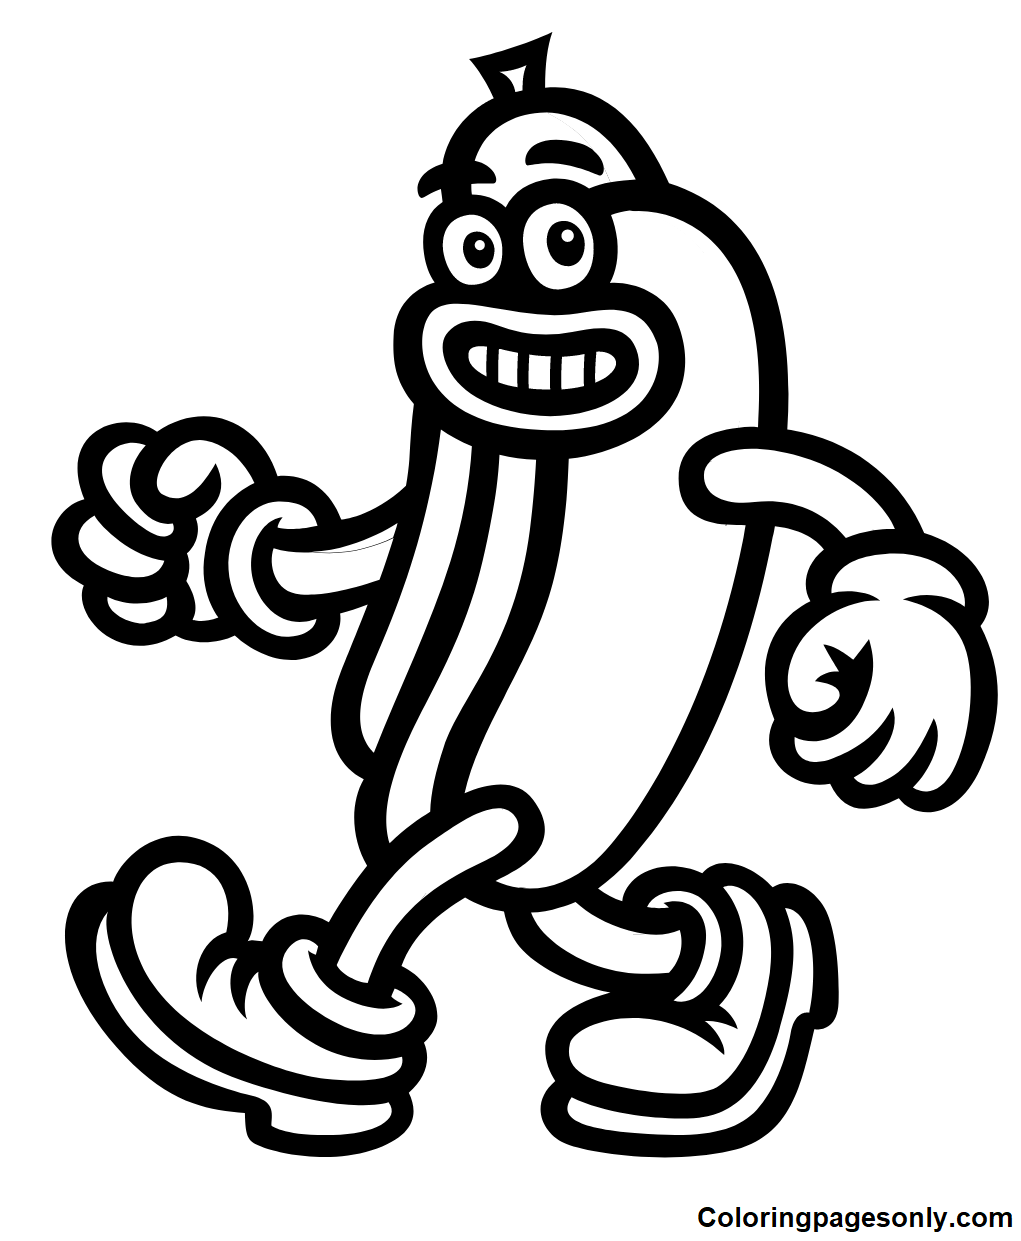 Hot Dog Image Coloring Pages